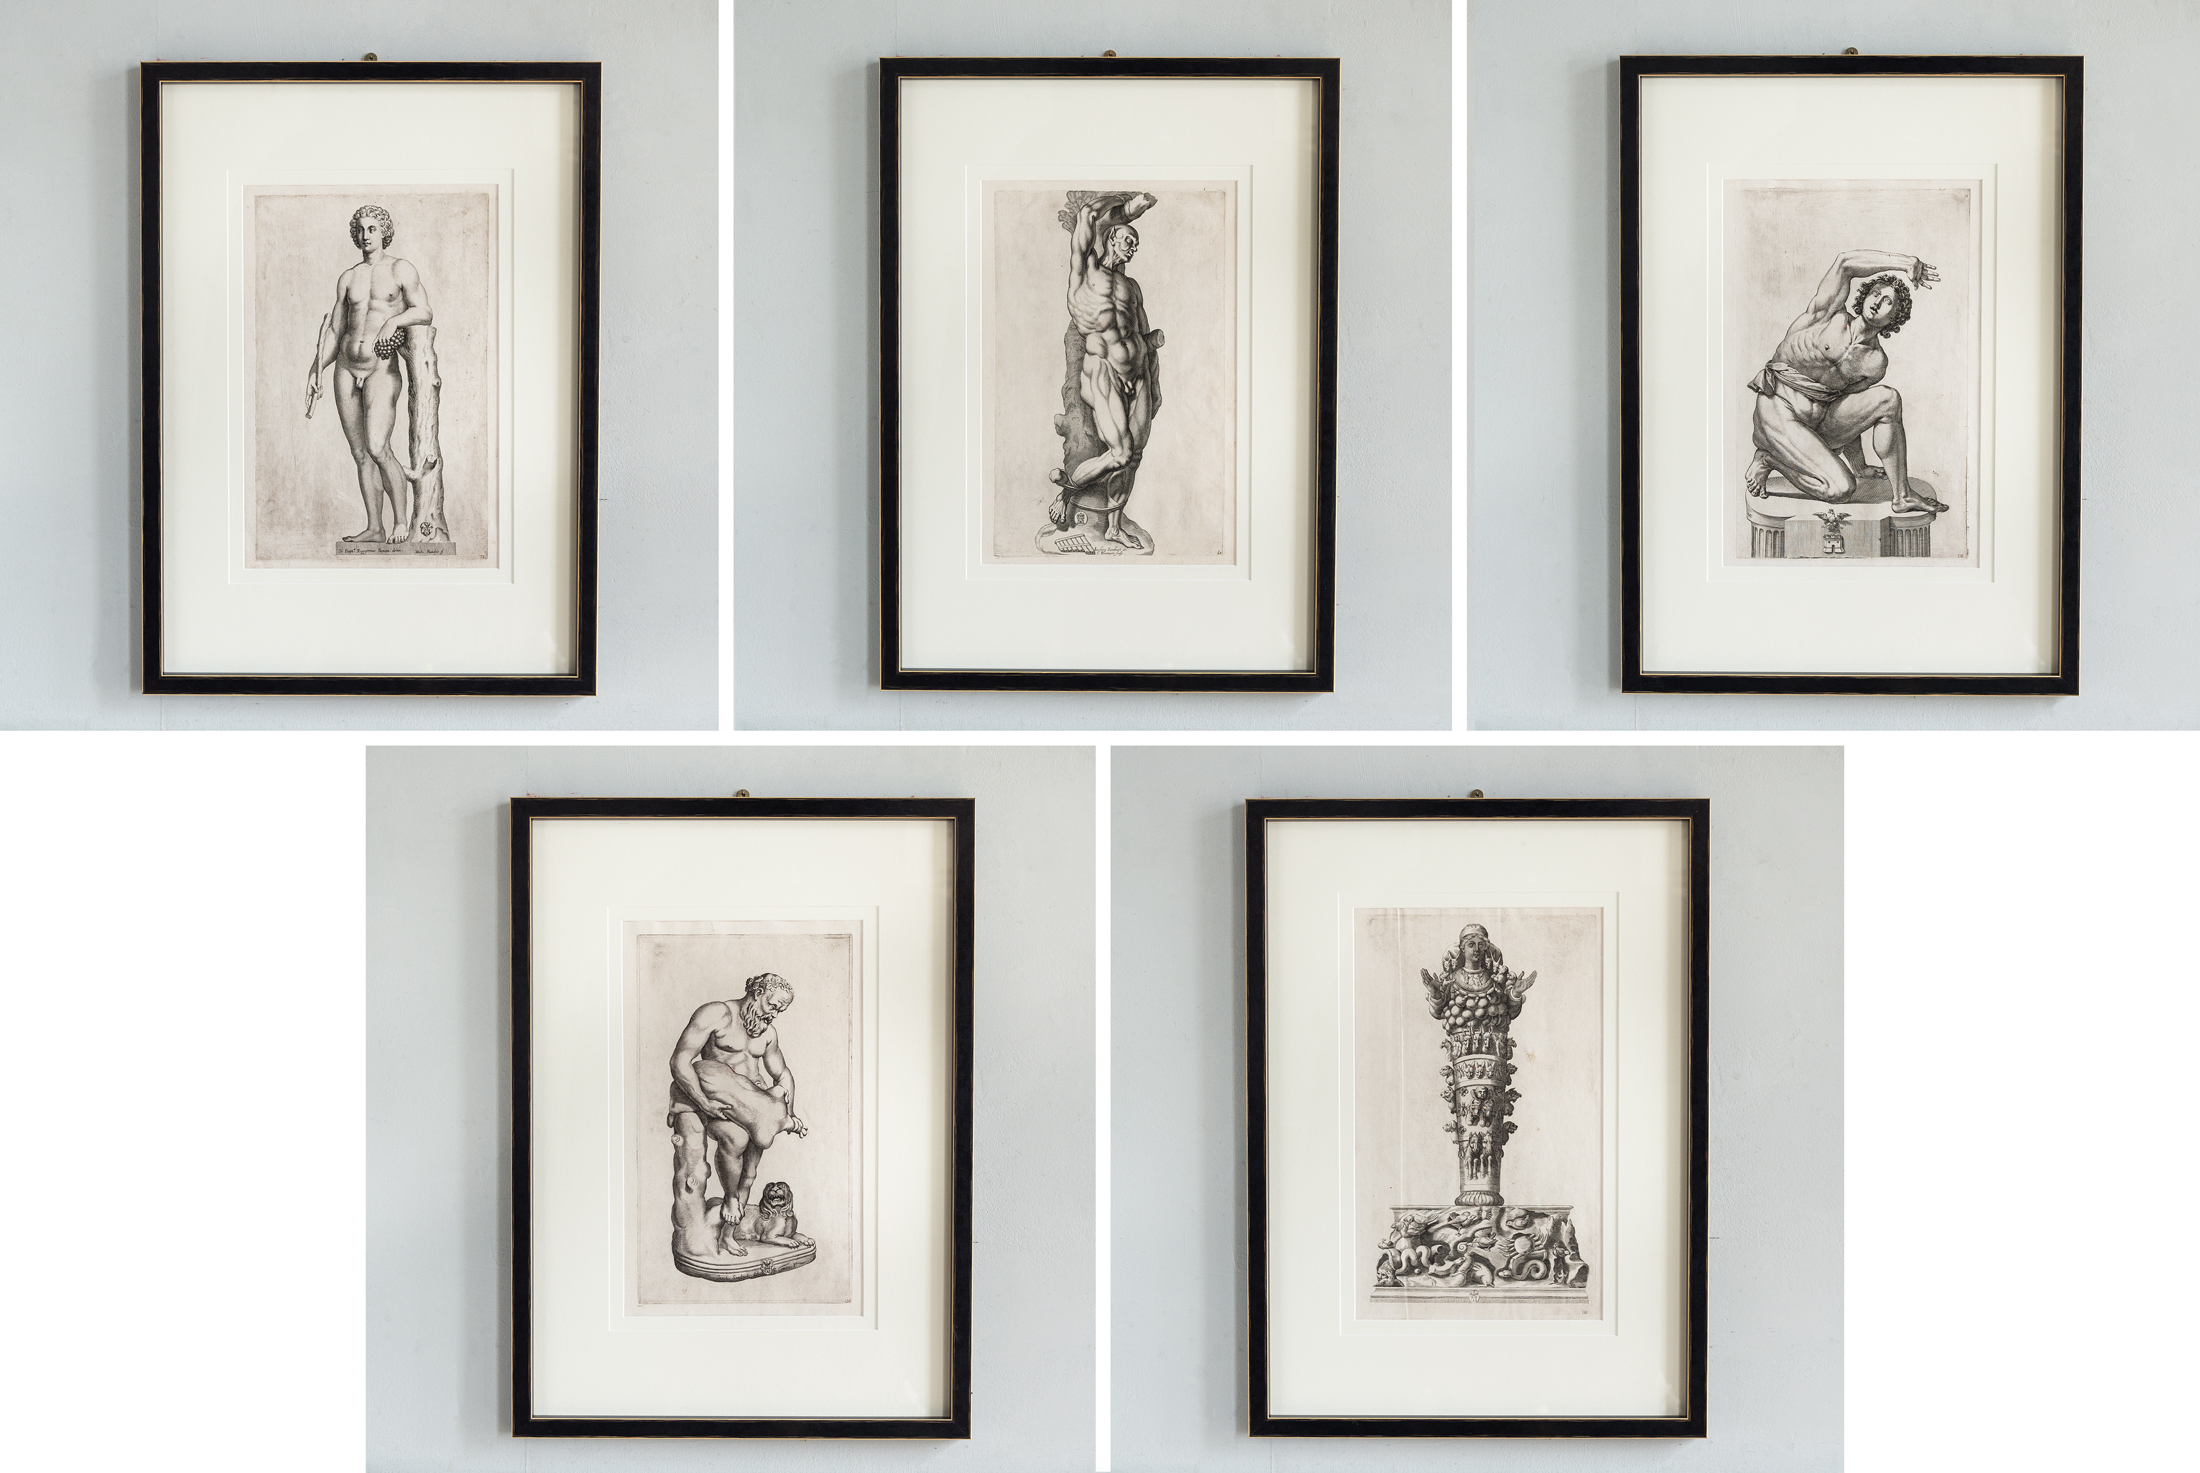 These prints are from a series showing the antique marble statues from the collection of Vincenzo Giustiniana,